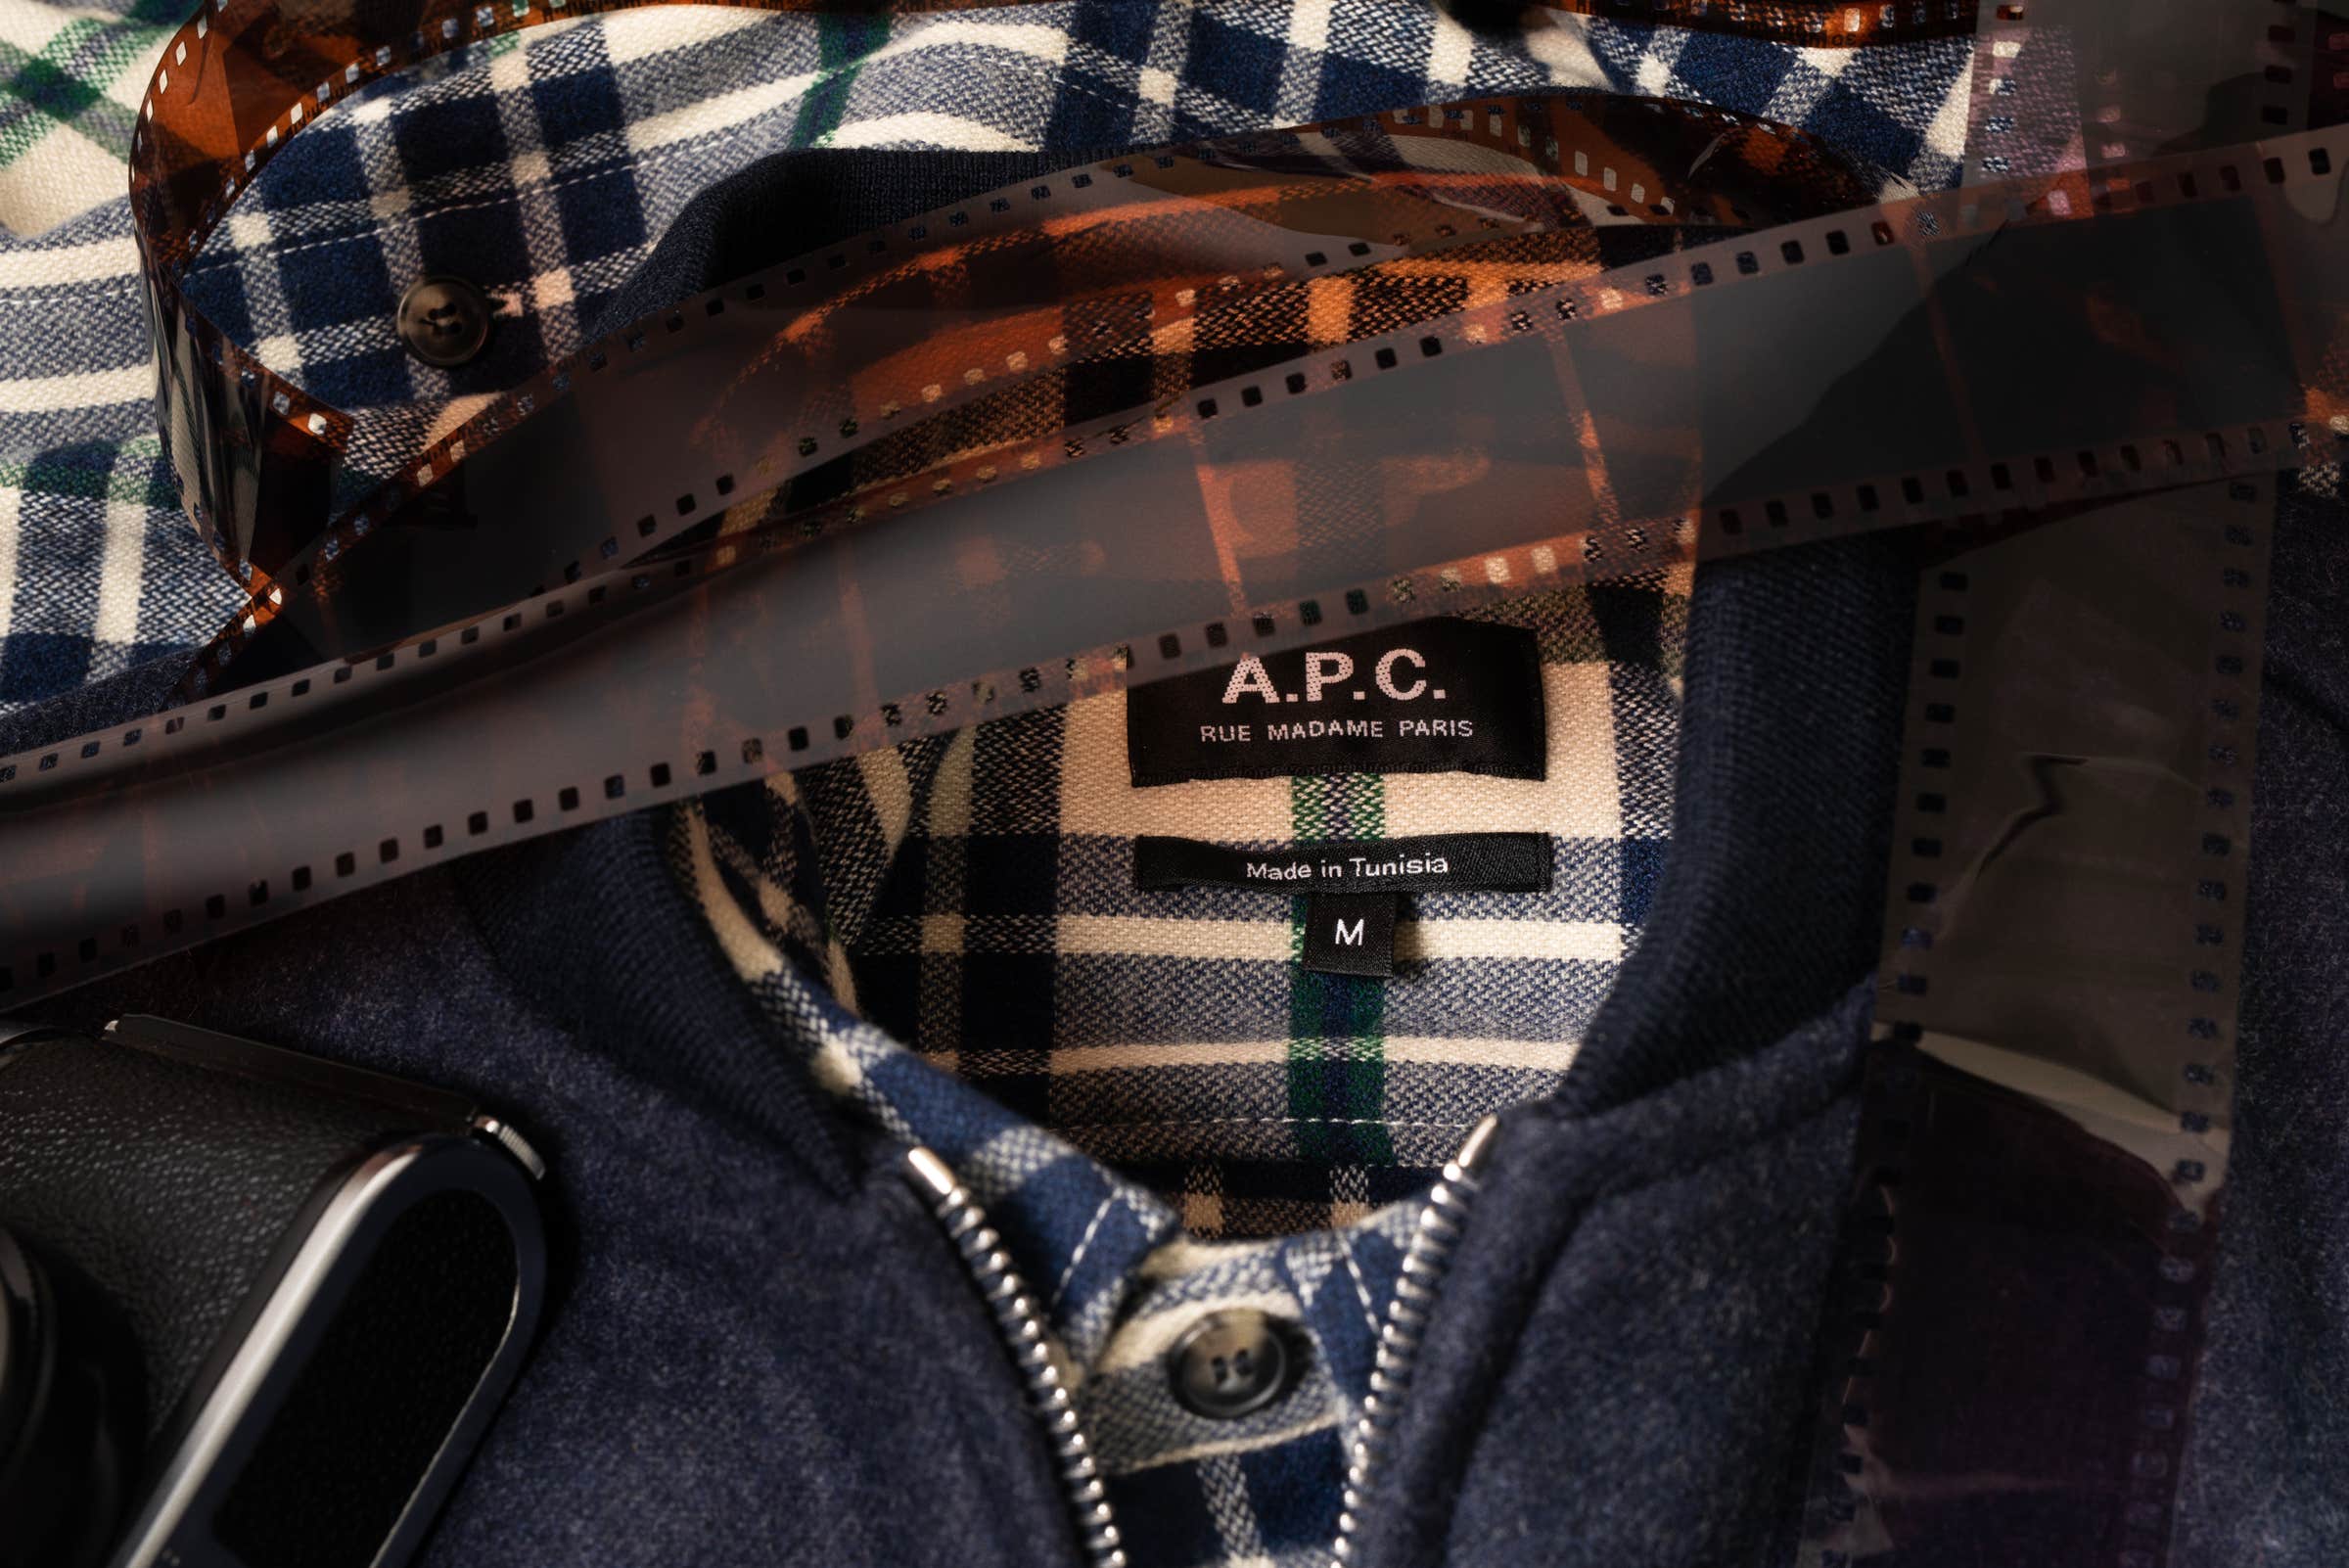 A.P.C.: The Masters of Parisian Casual Style